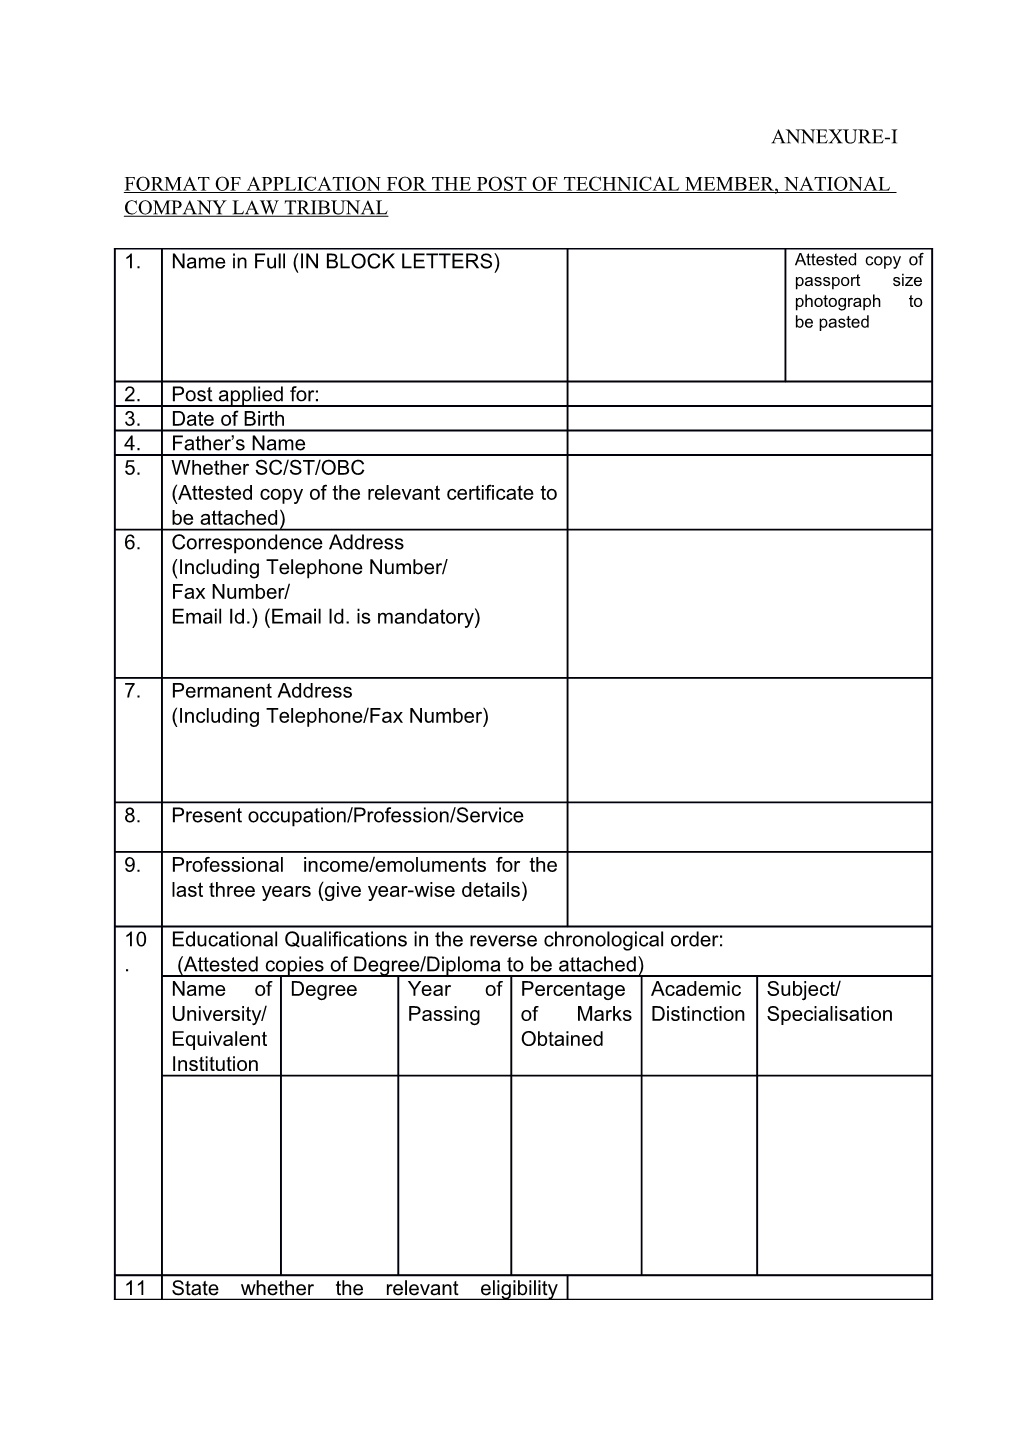 Format of Application for the Post of Technical Member, National Company Law Tribunal